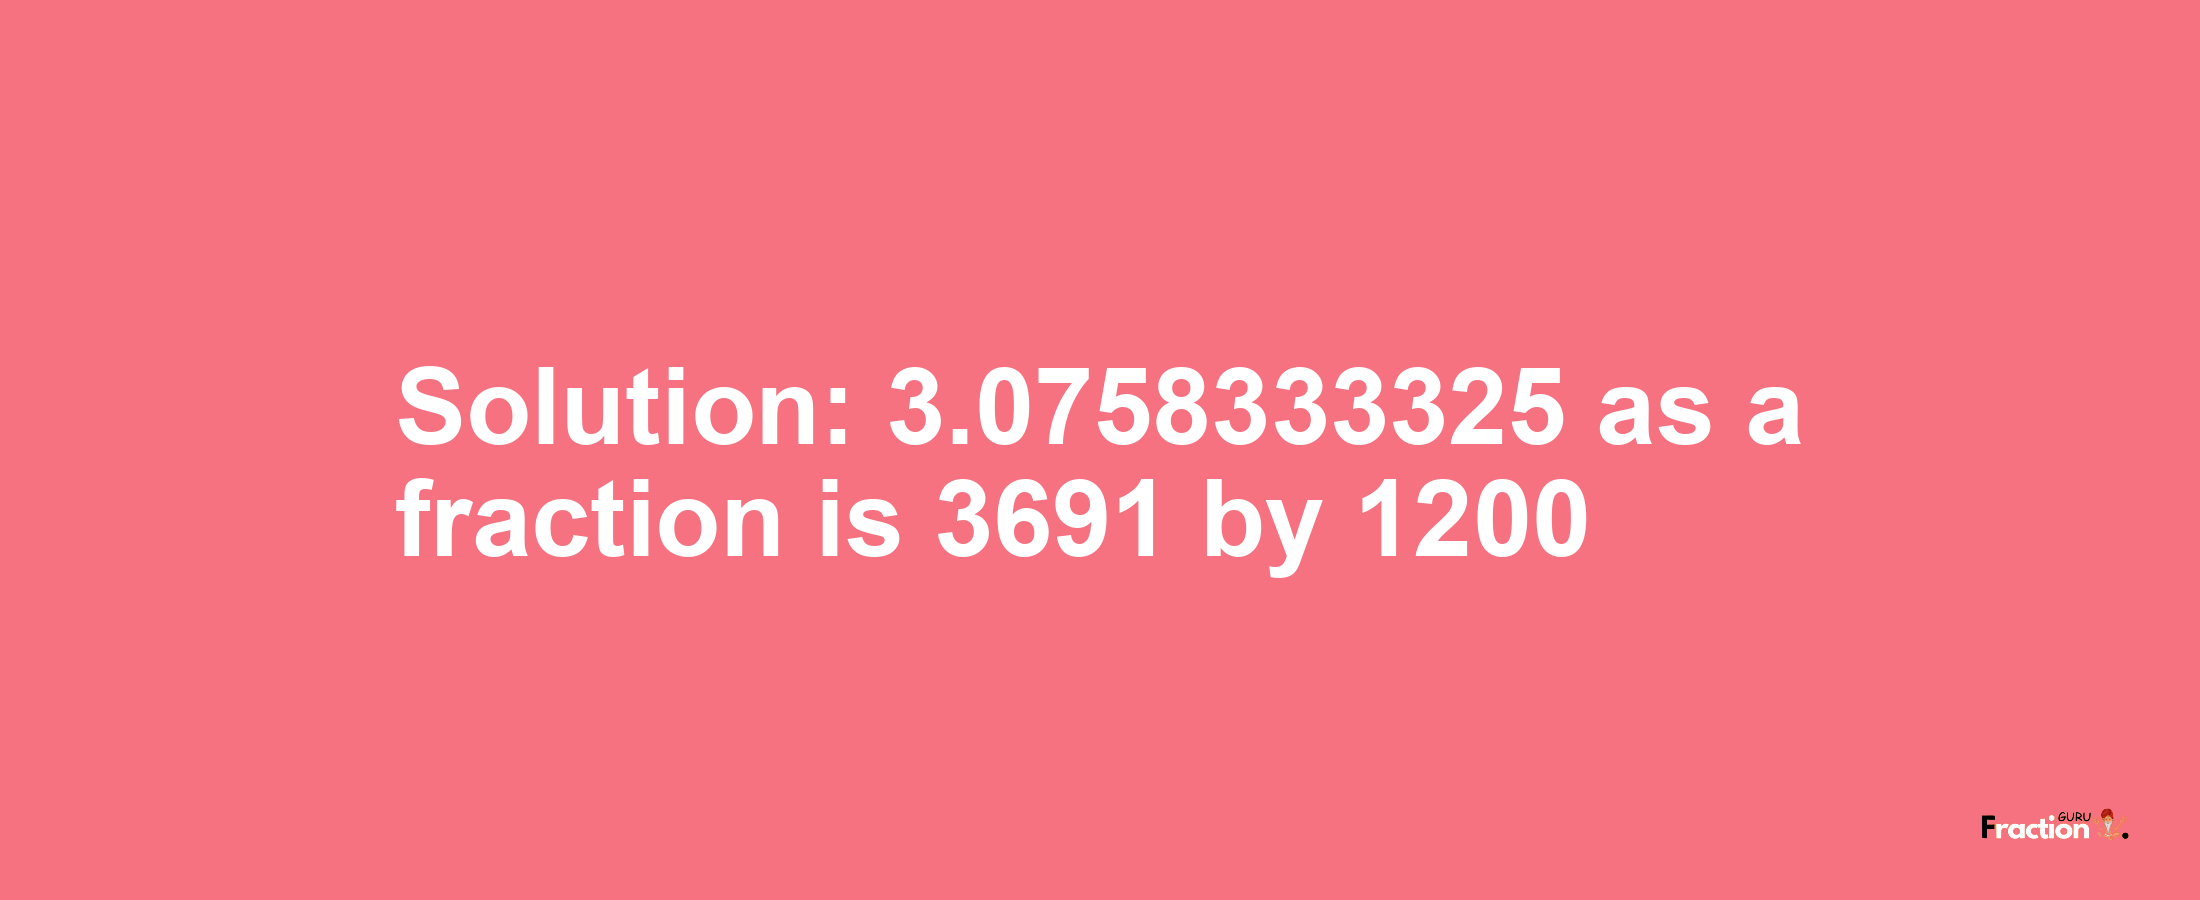 Solution:3.0758333325 as a fraction is 3691/1200